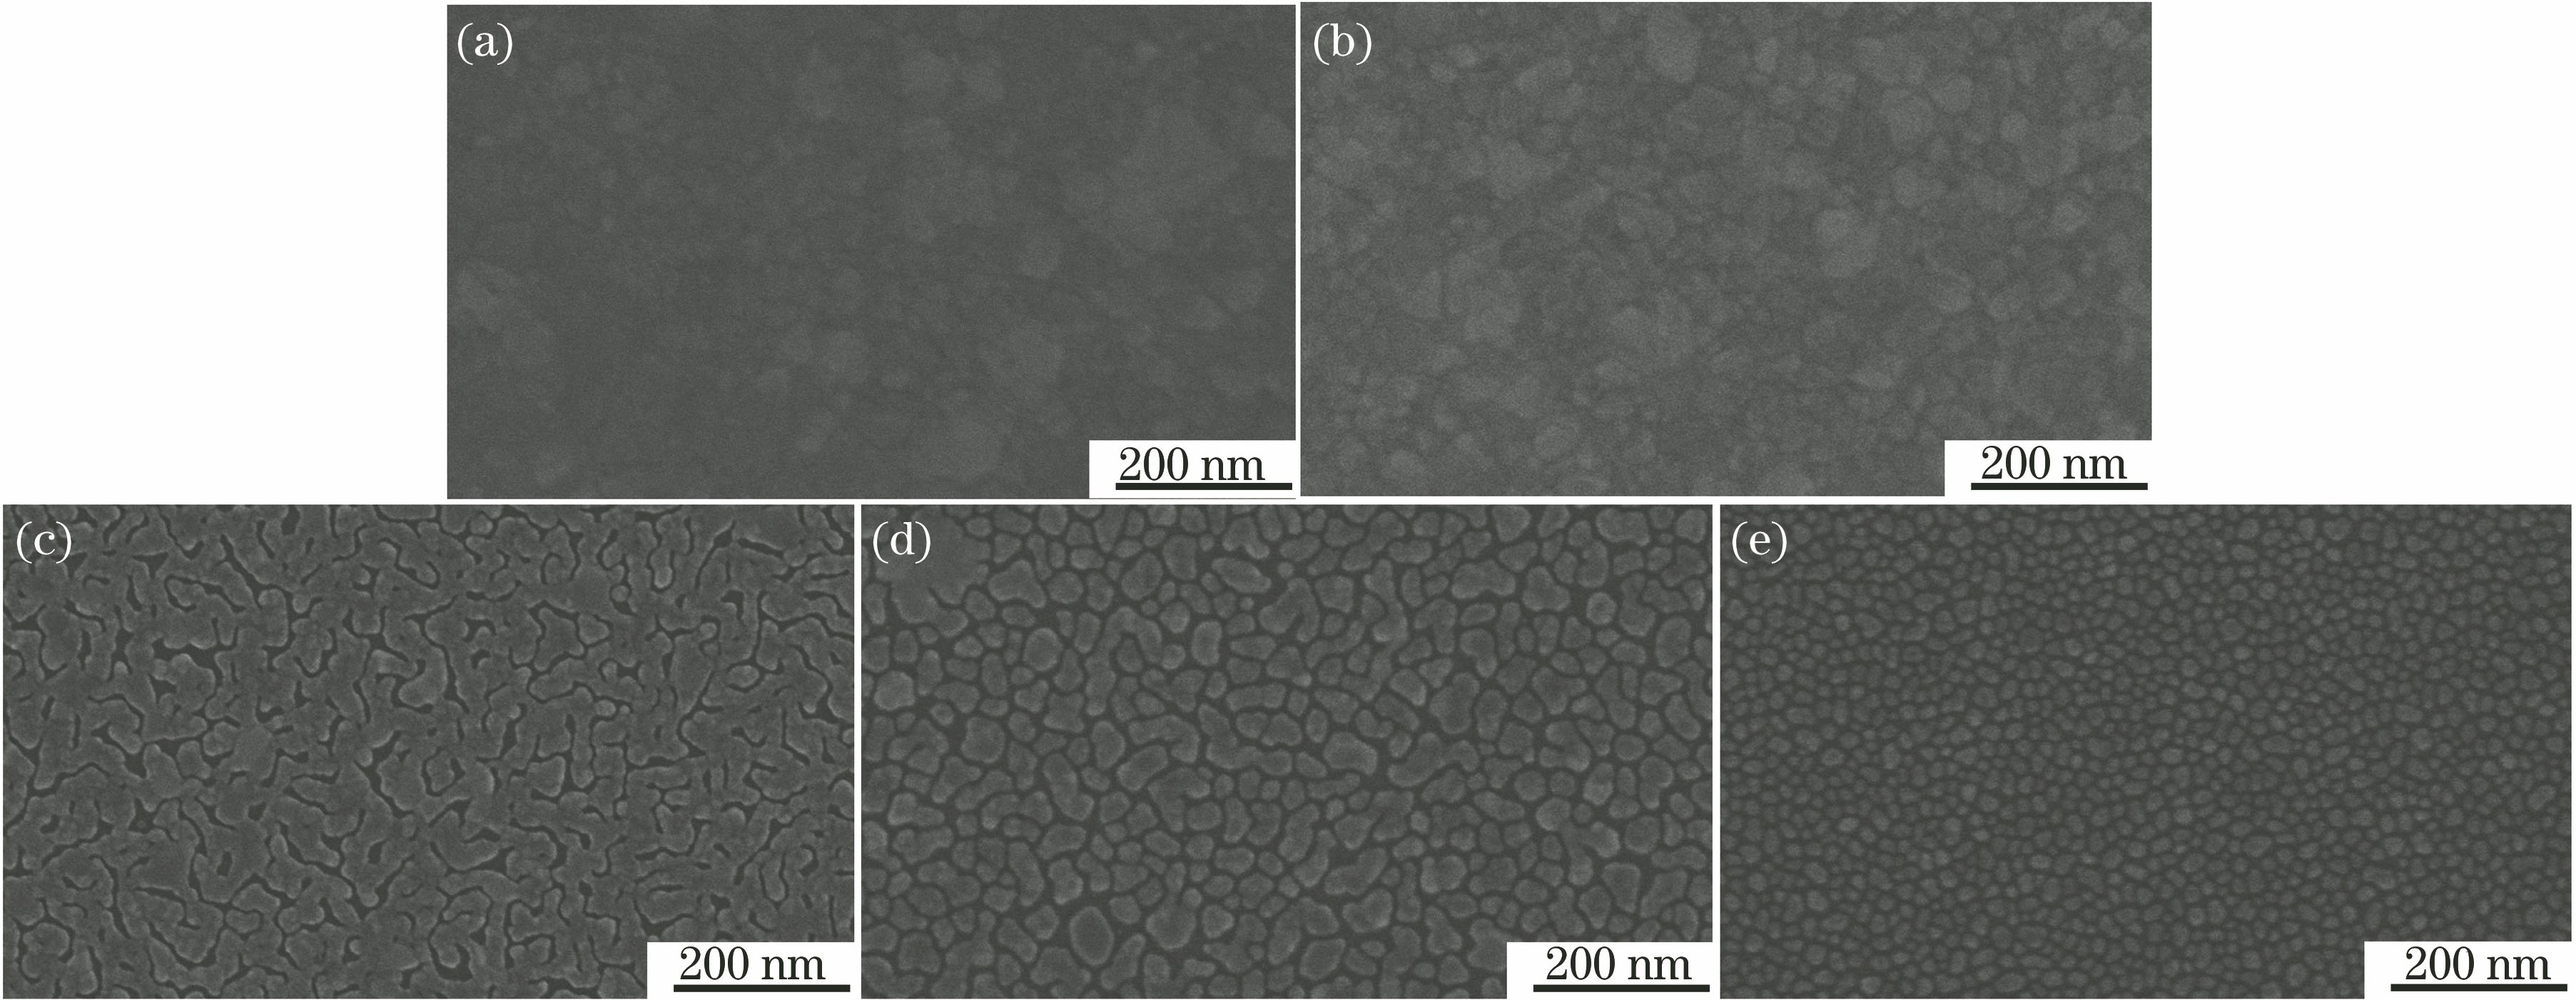 SEM graphs of samples deposited under different distances from target to substrate when laser fluence is 4 J/cm2. (a) 3 cm; (b) 4 cm; (c) 5 cm; (d) 6 cm; (e) 7 cm